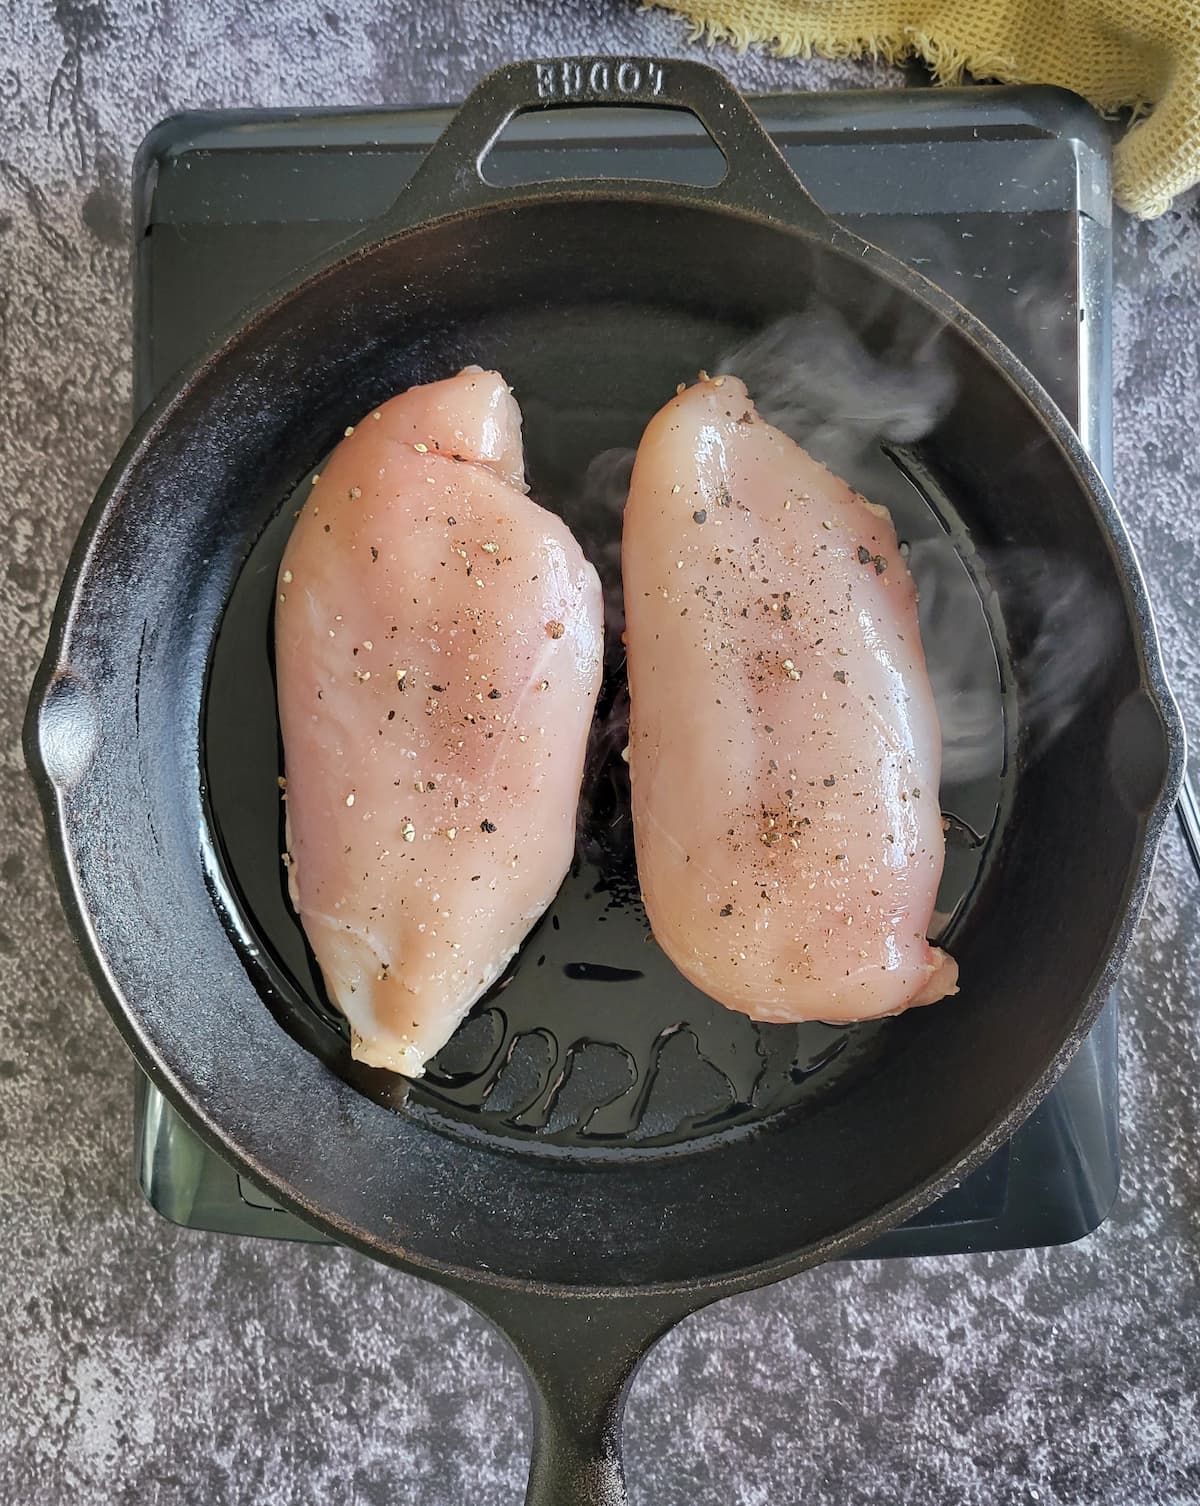 two raw chicken breasts seasoned with salt and pepper searing in a cast iron skillet on a burner